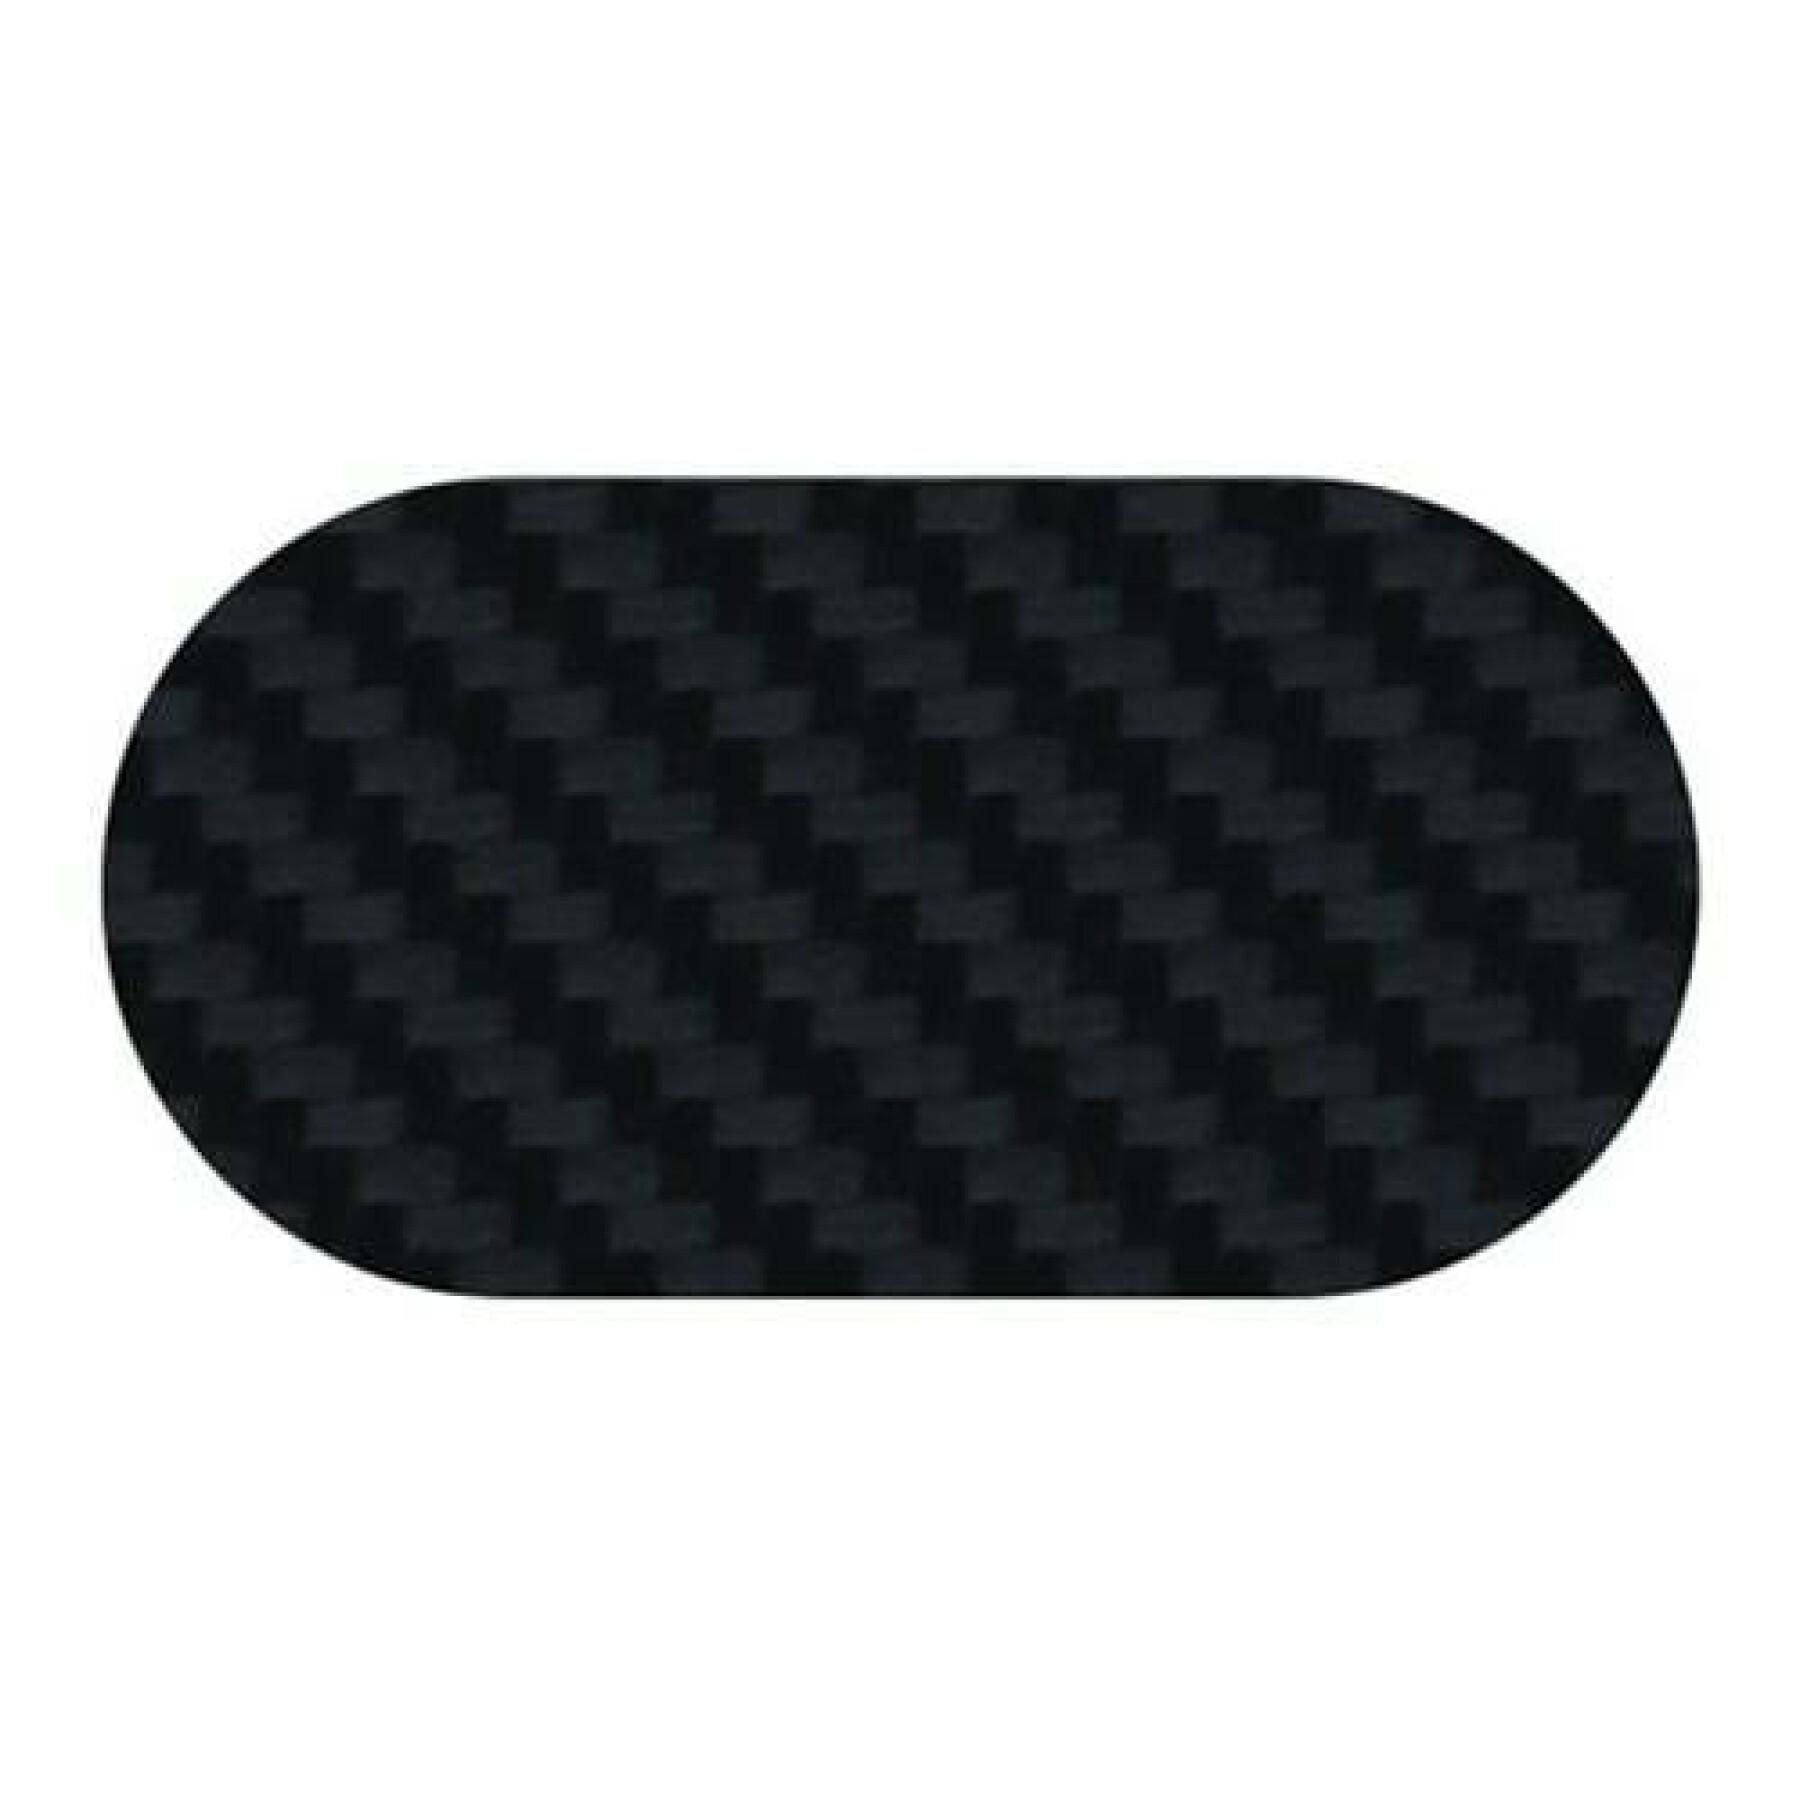 Protectores del marco Lizard Skins Patch Kit-Carbon Leather